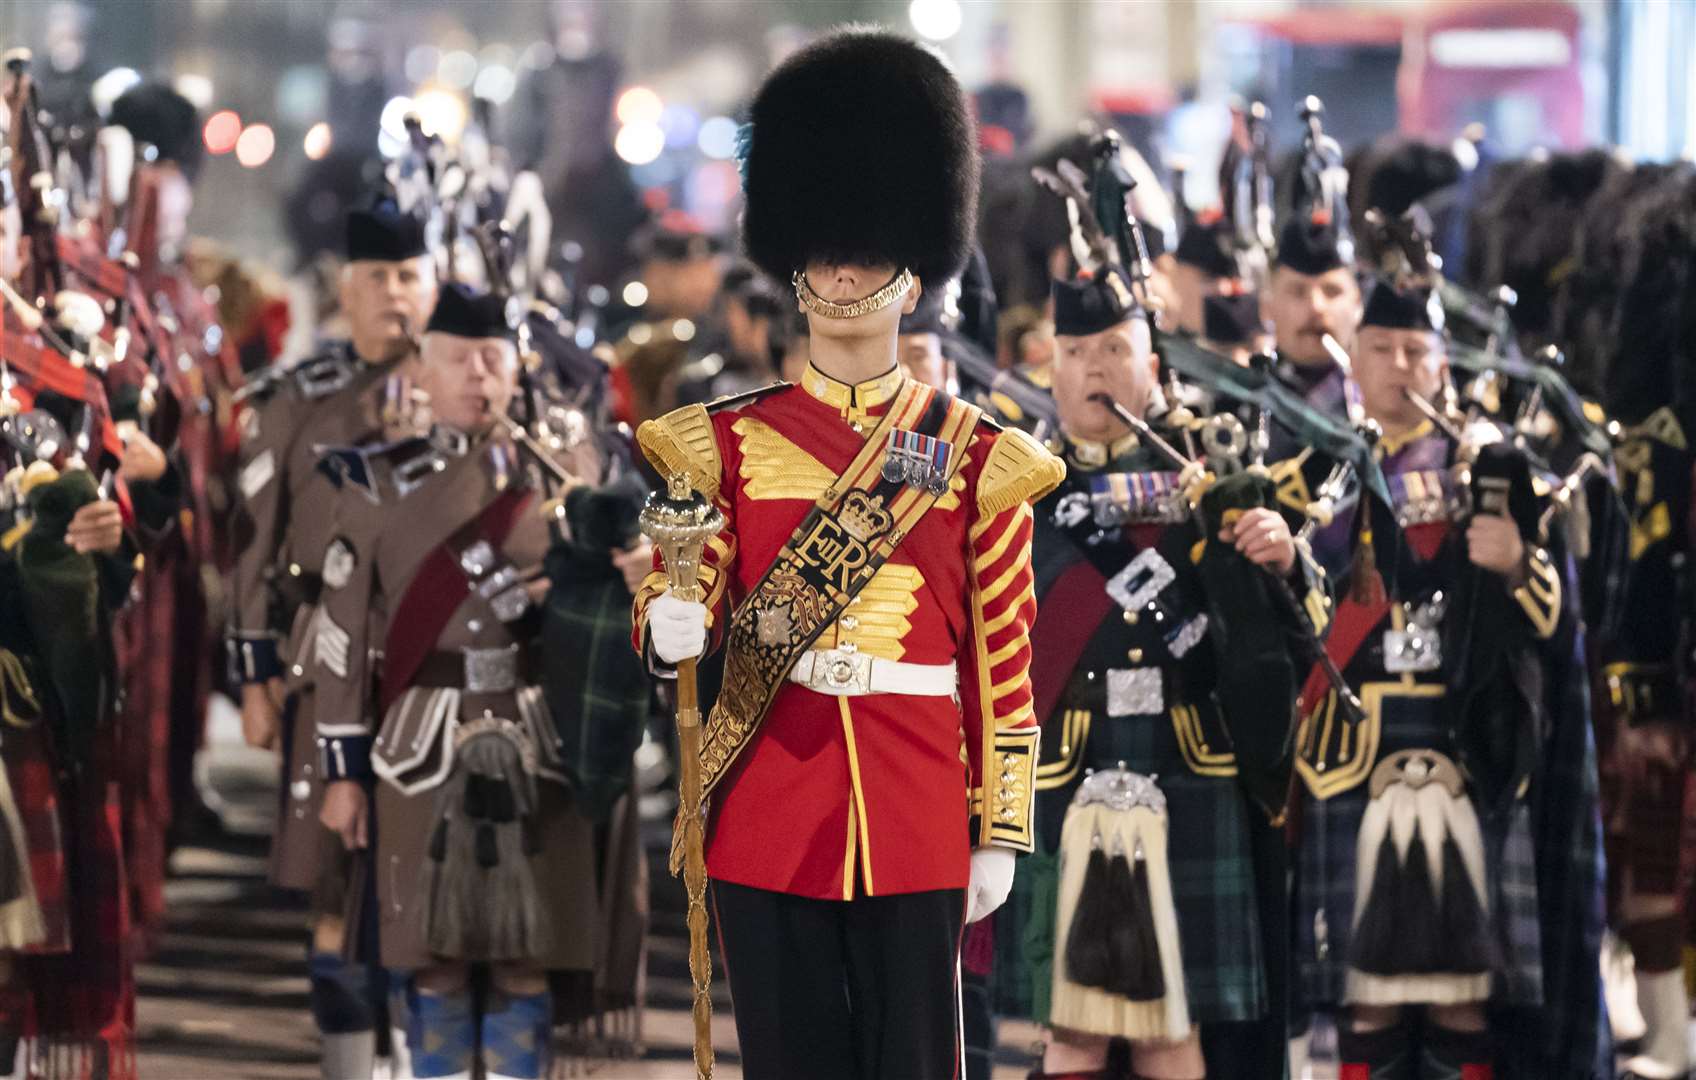 The sound of bagpipes began at 2.45am, signalling the start of the procession and echoing through the quiet streets of London (Danny Lawson/PA)